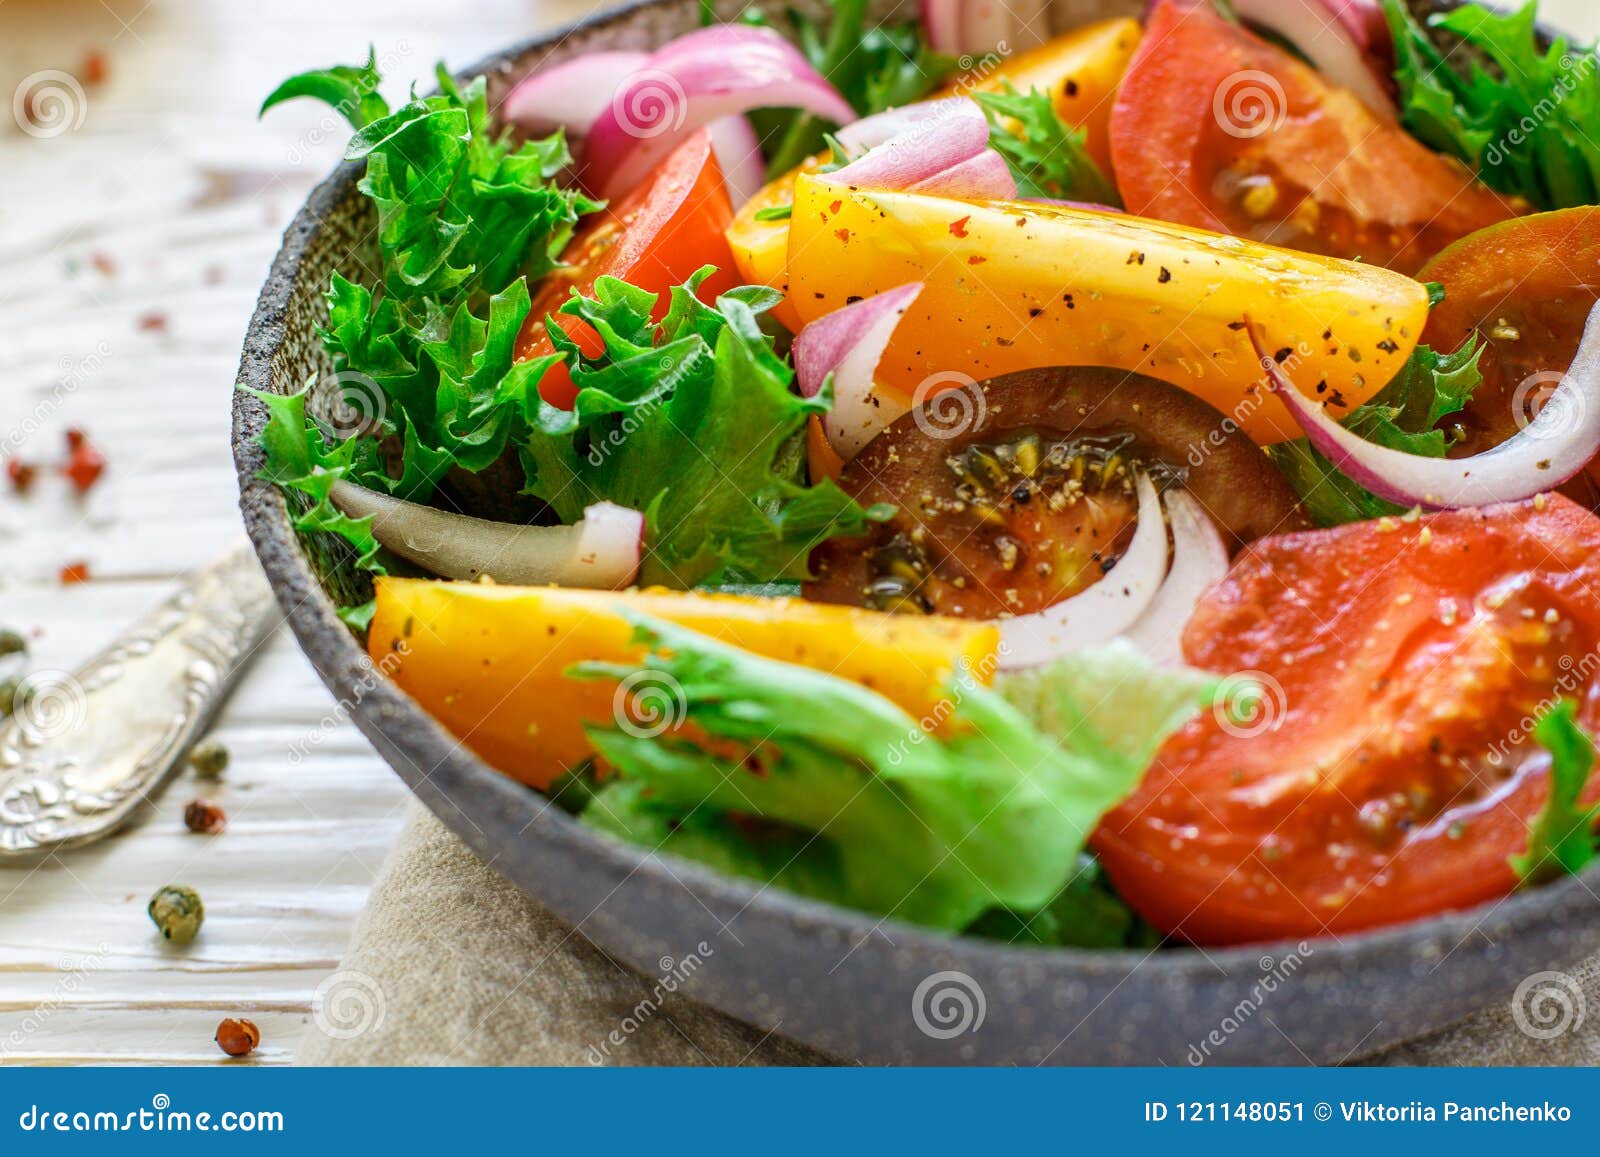 Delicious Summer Salad of Colorful Yellow, Red and Black Ripe Tomatoes ...